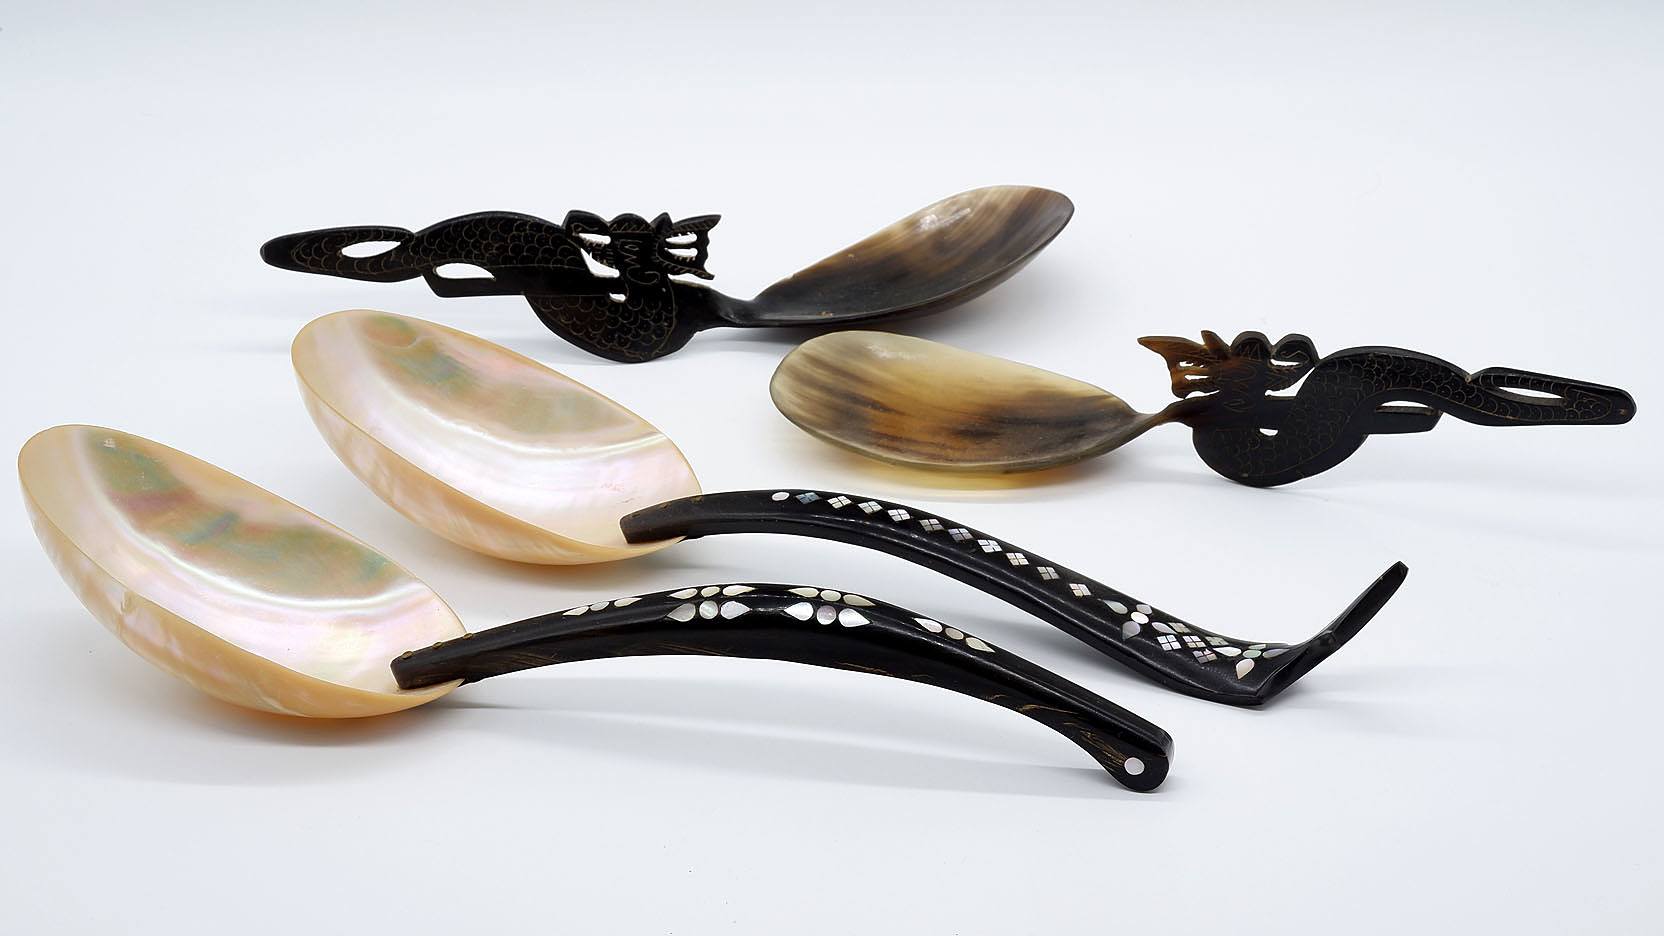 'South East Asian Buffalo Horn and Shell Inlaid Serving Spoons'